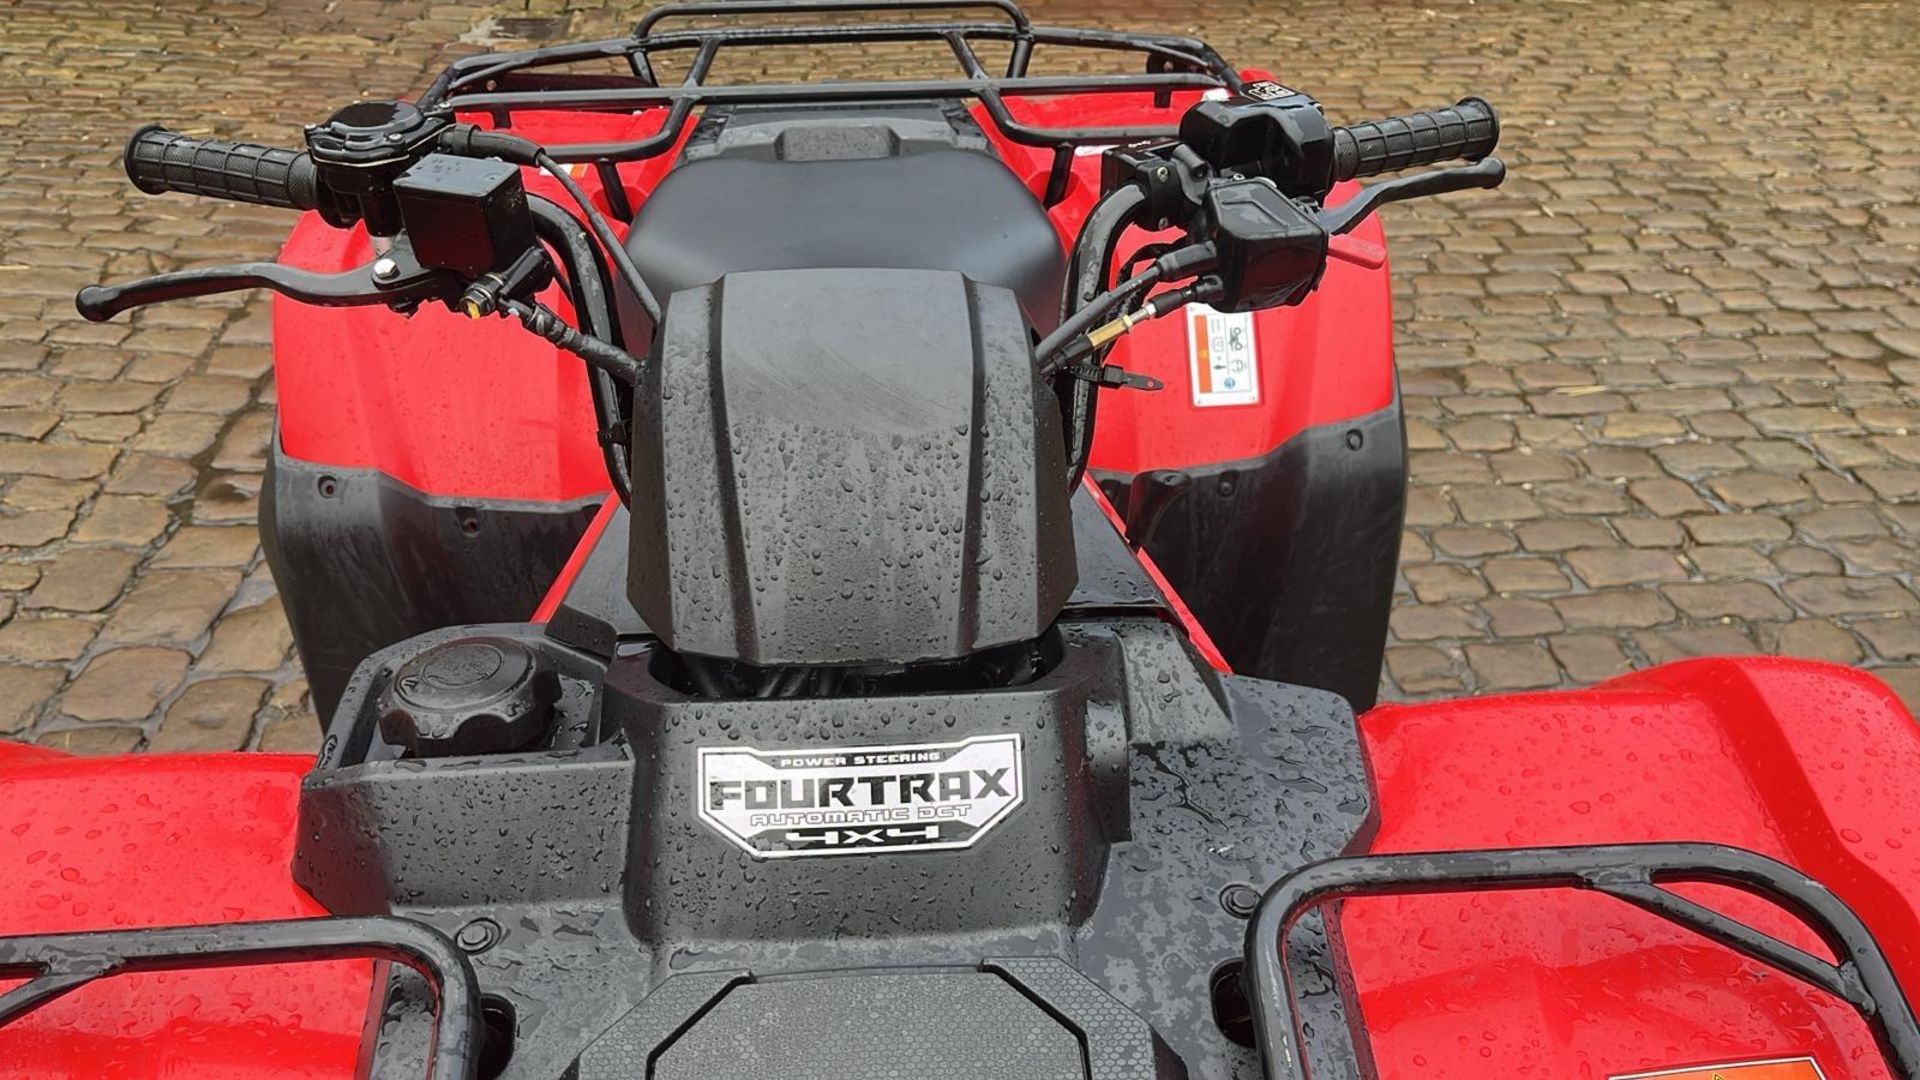 2018 HONDA TRX420FA6 FOURTRAX RANCHER AUTOMATIC DCT QUAD BIKE CAN BE SWITCED FROM 2 TO 4 WHEEL DRIVE - Image 2 of 21